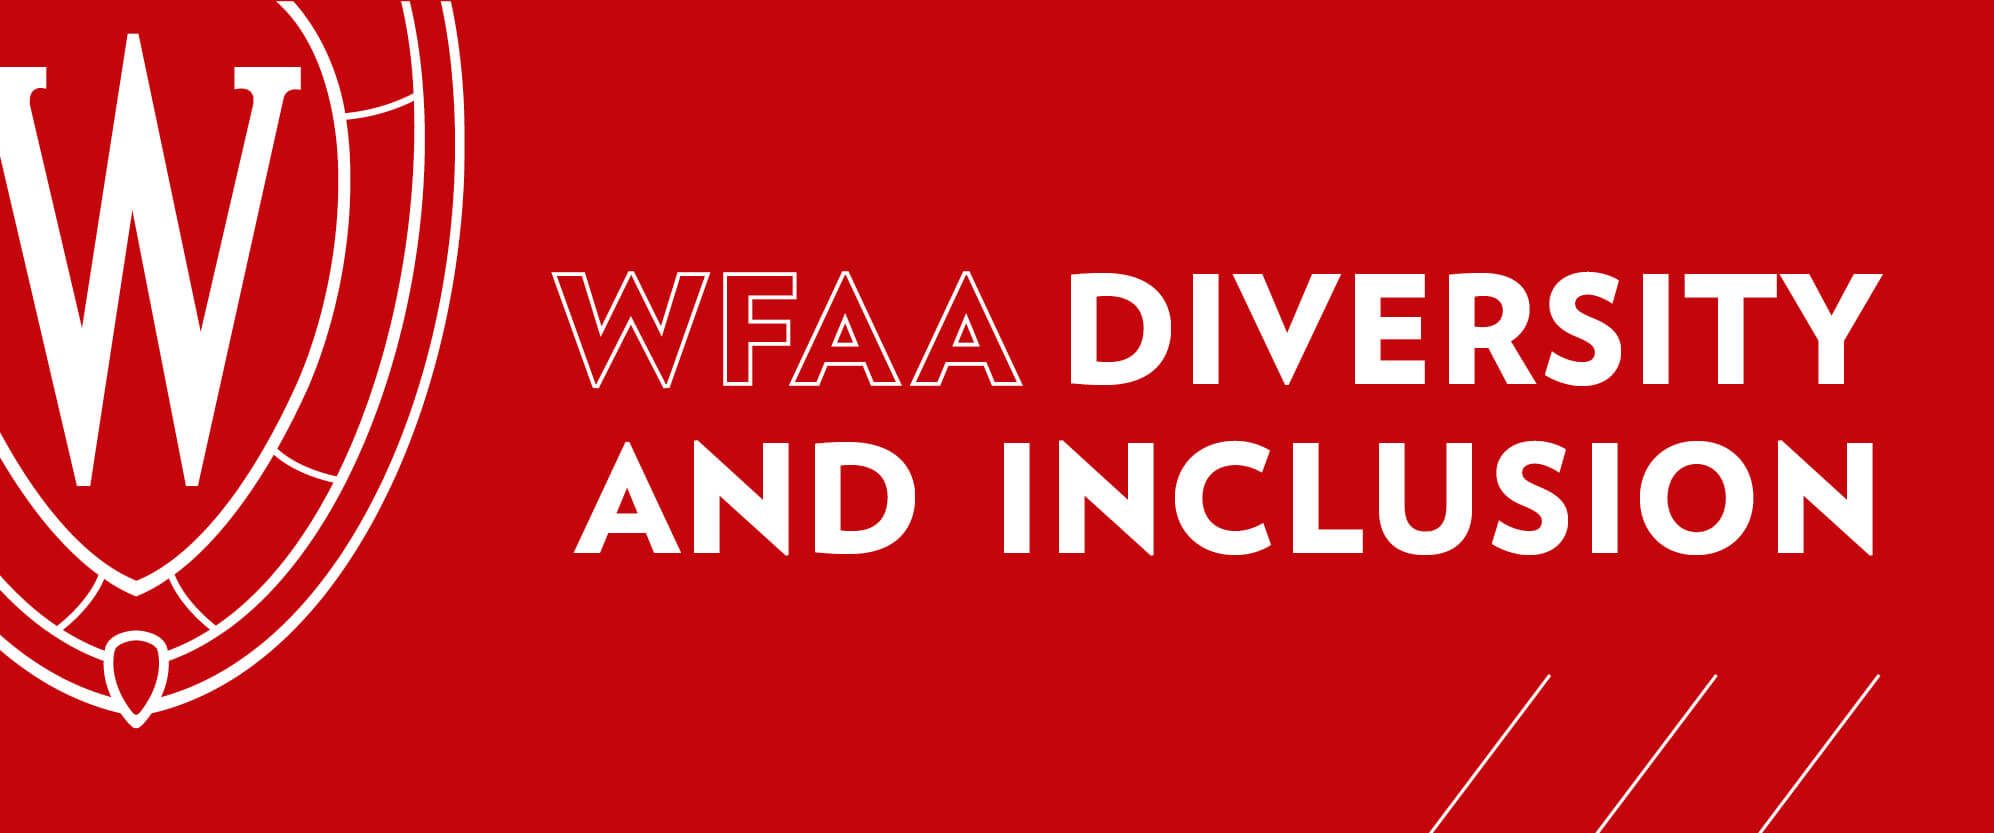 WFAA Diversity and Inclusion